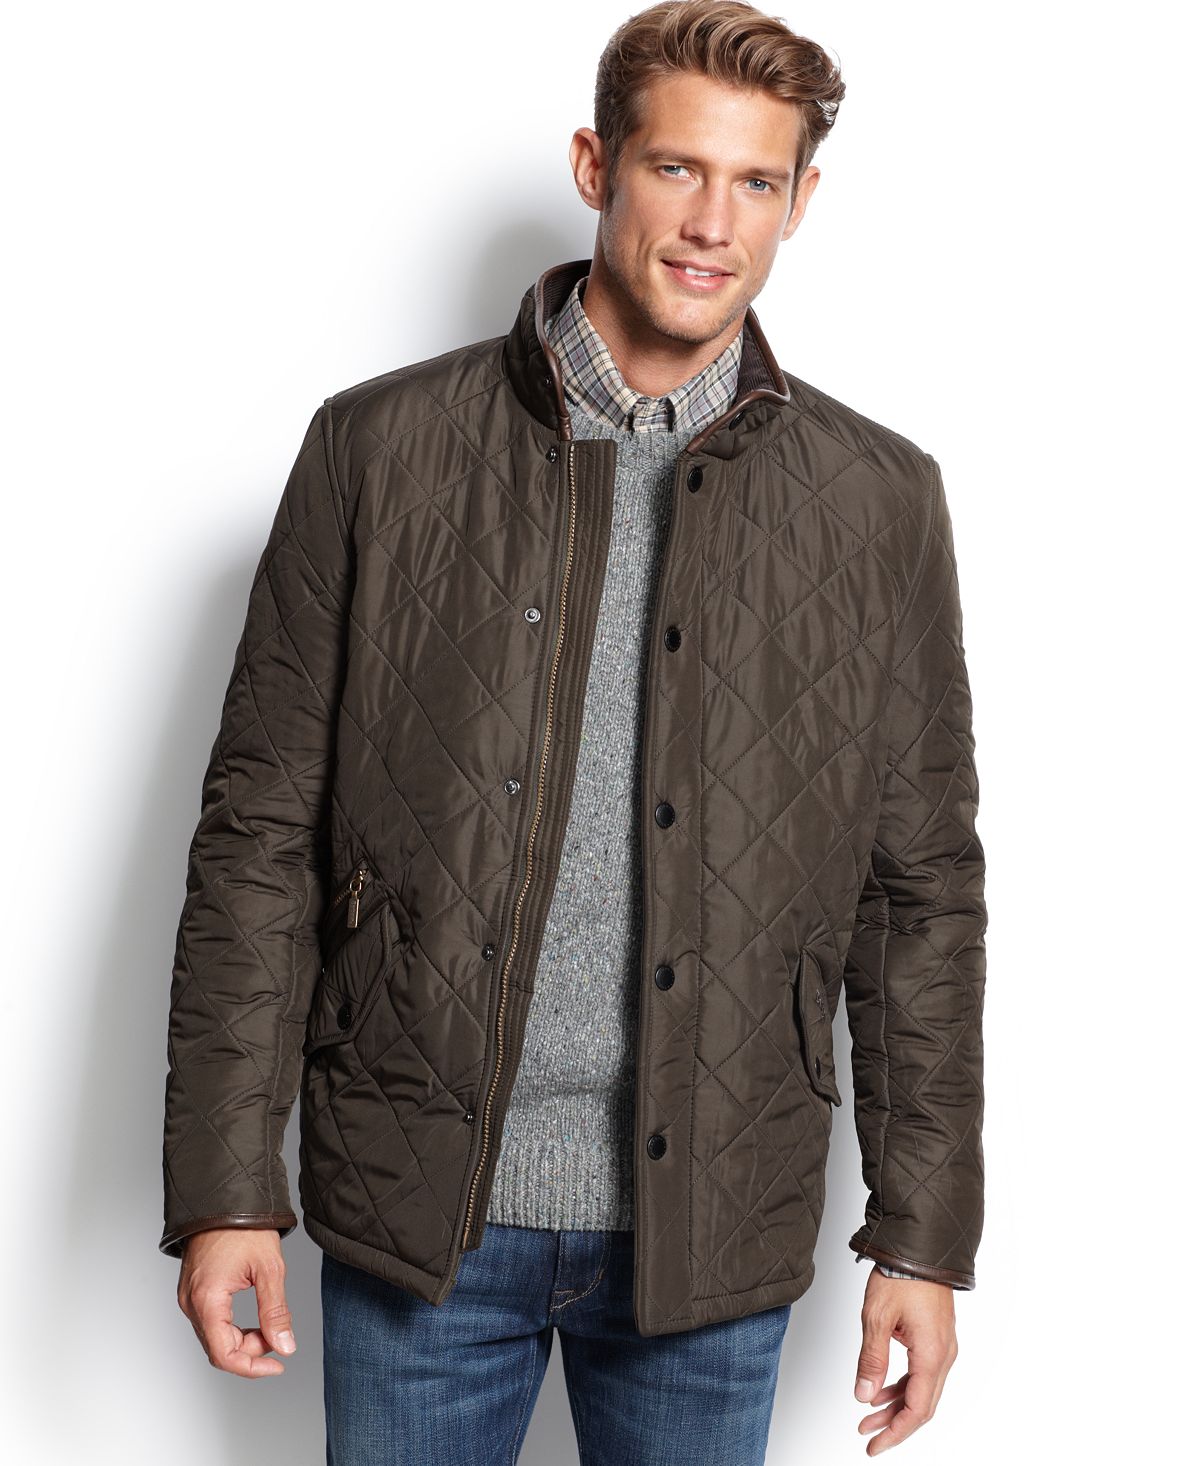 Barbour Powell Quilted Jacket. Barbour Jacket. Куртка Barbour mqu0717ny71. Стеганка Barbour.